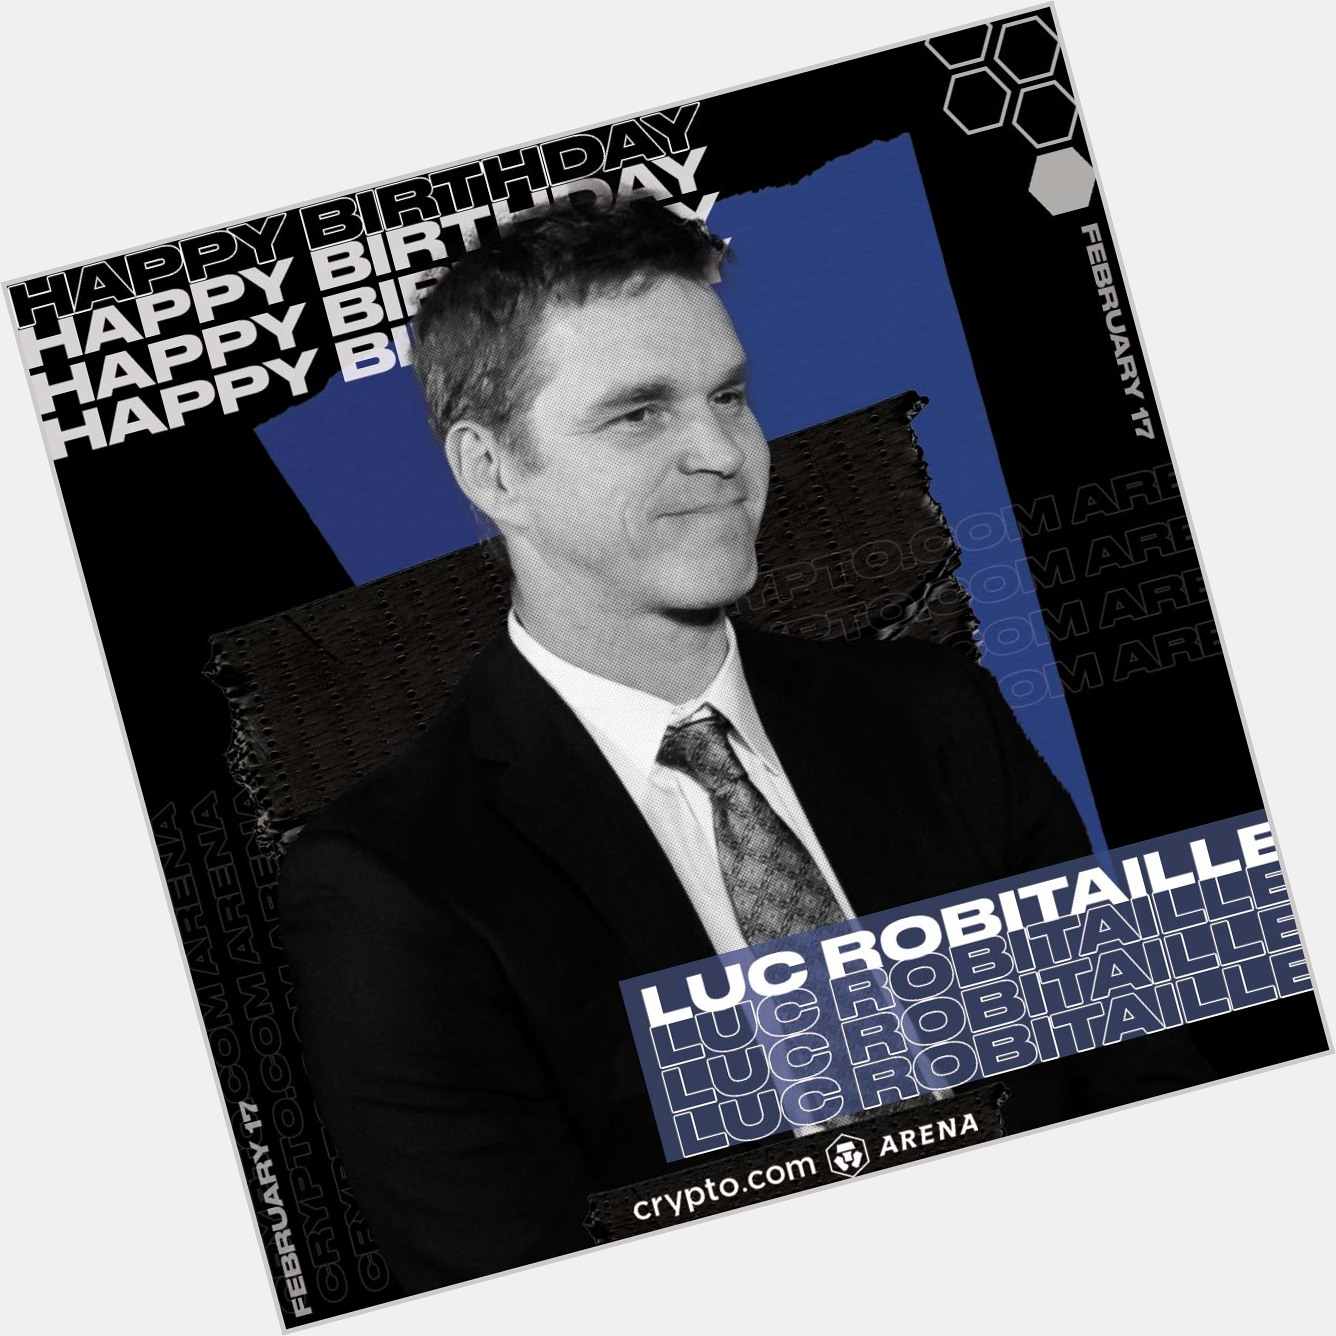 Happy birthday to Luc Robitaille!  